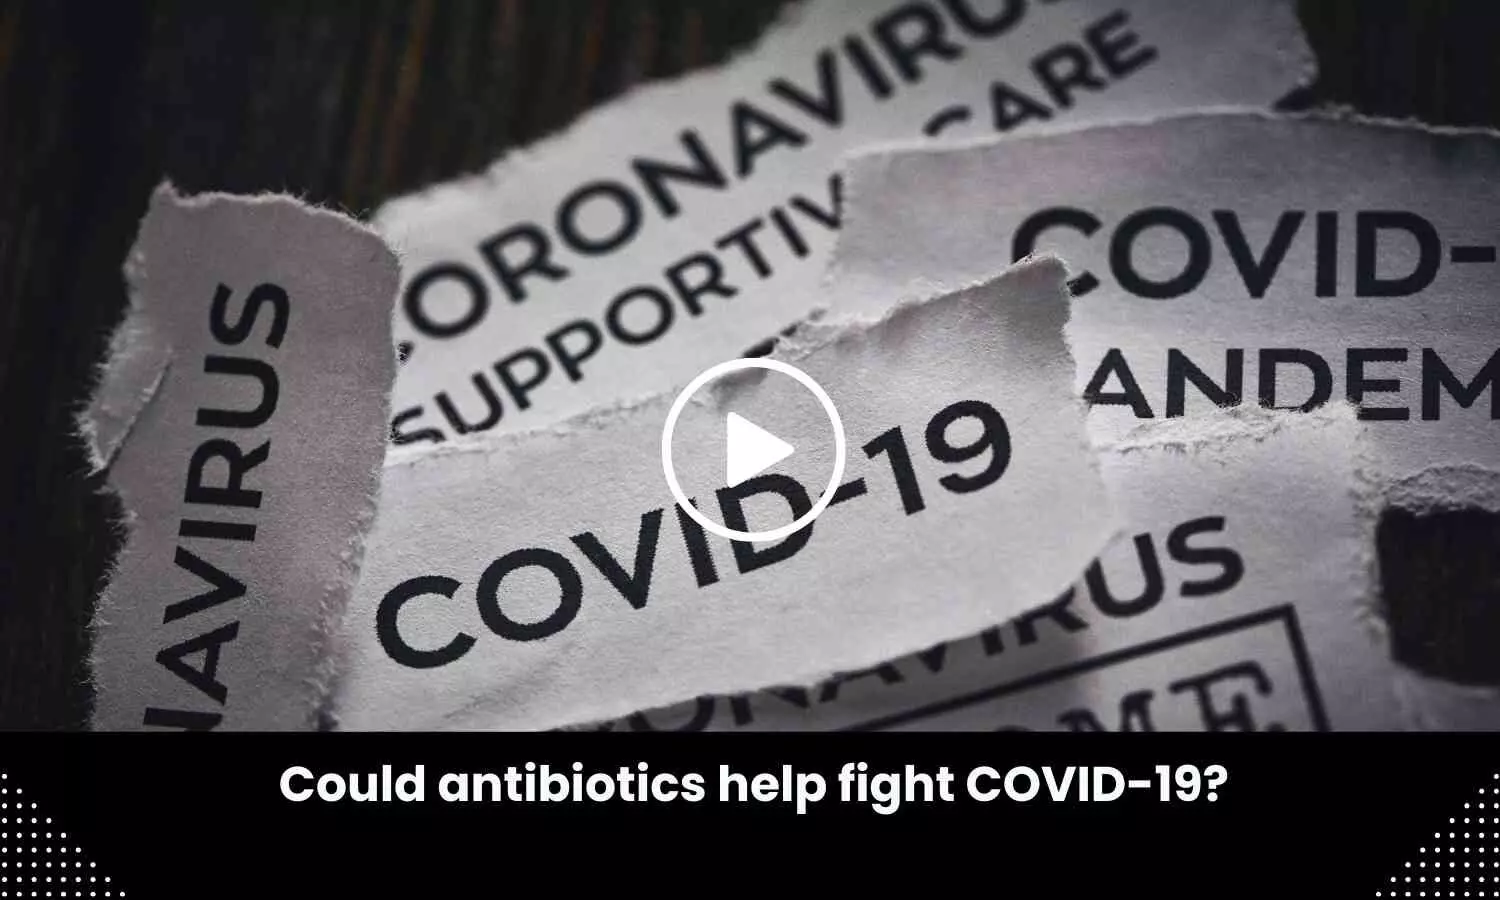 Could antibiotics help fight COVID-19? Study sheds light